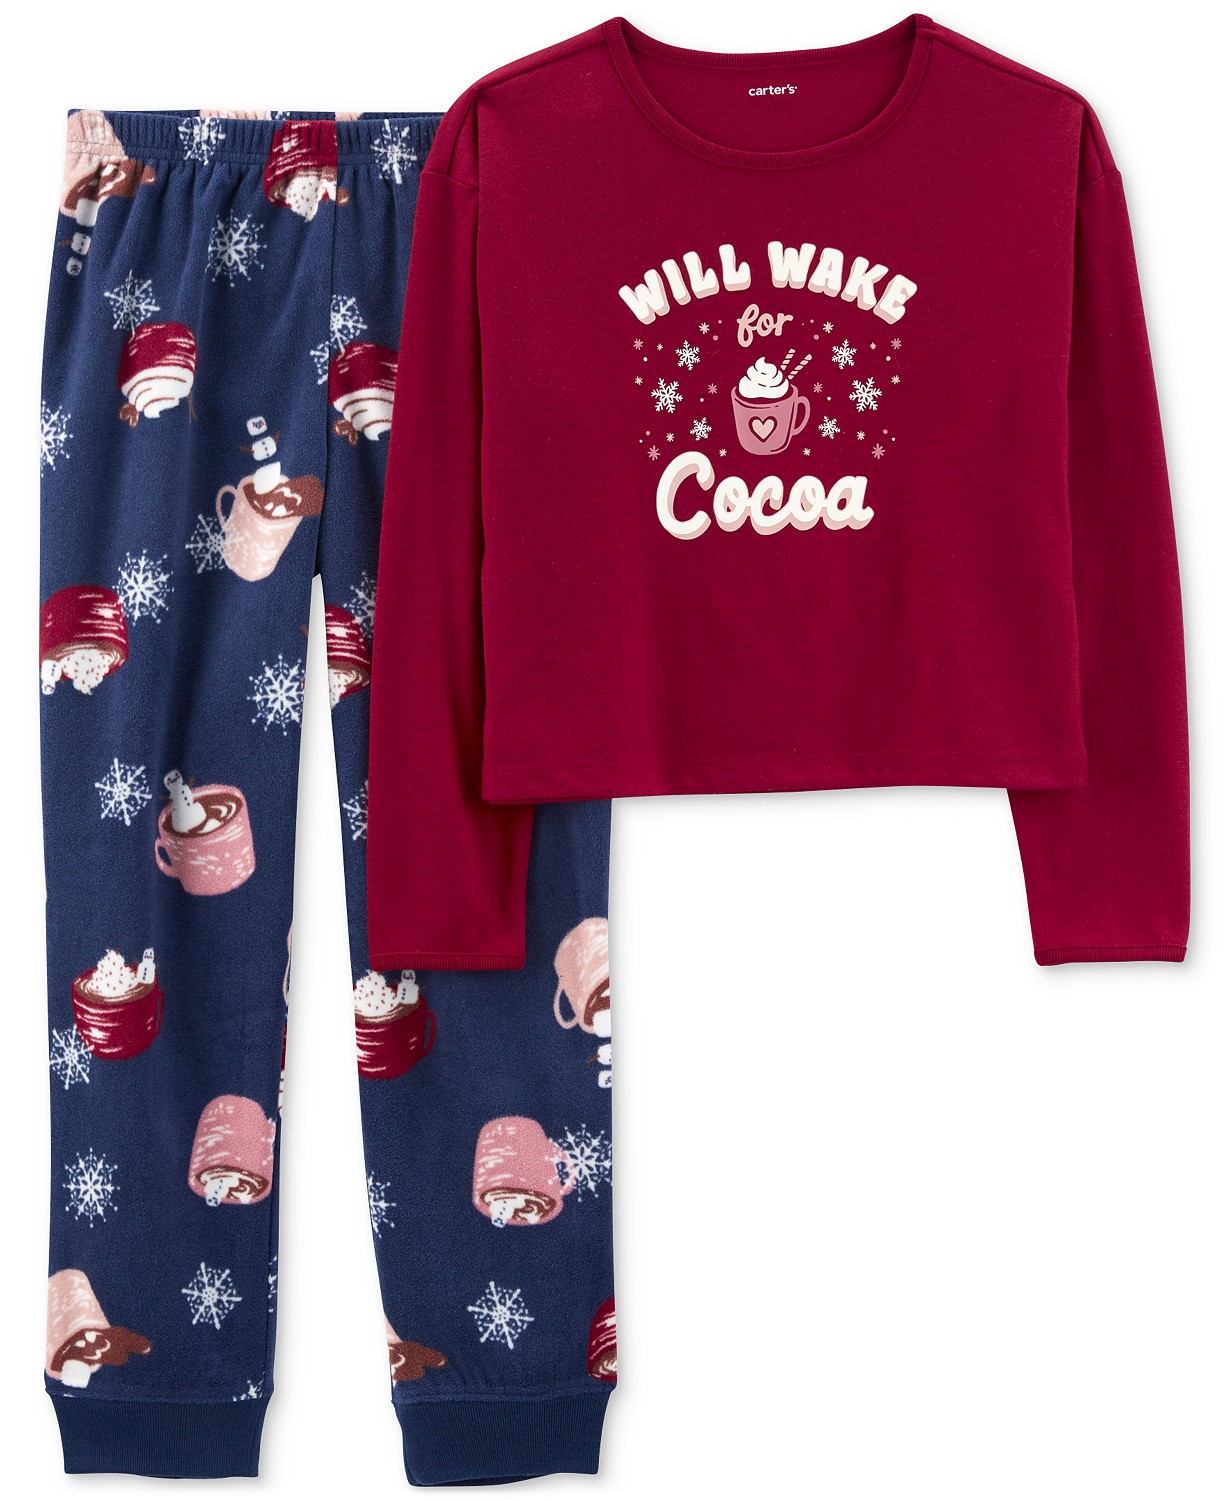 Little Girls Will Wake for Cocoa Pajamas 2 Piece Set